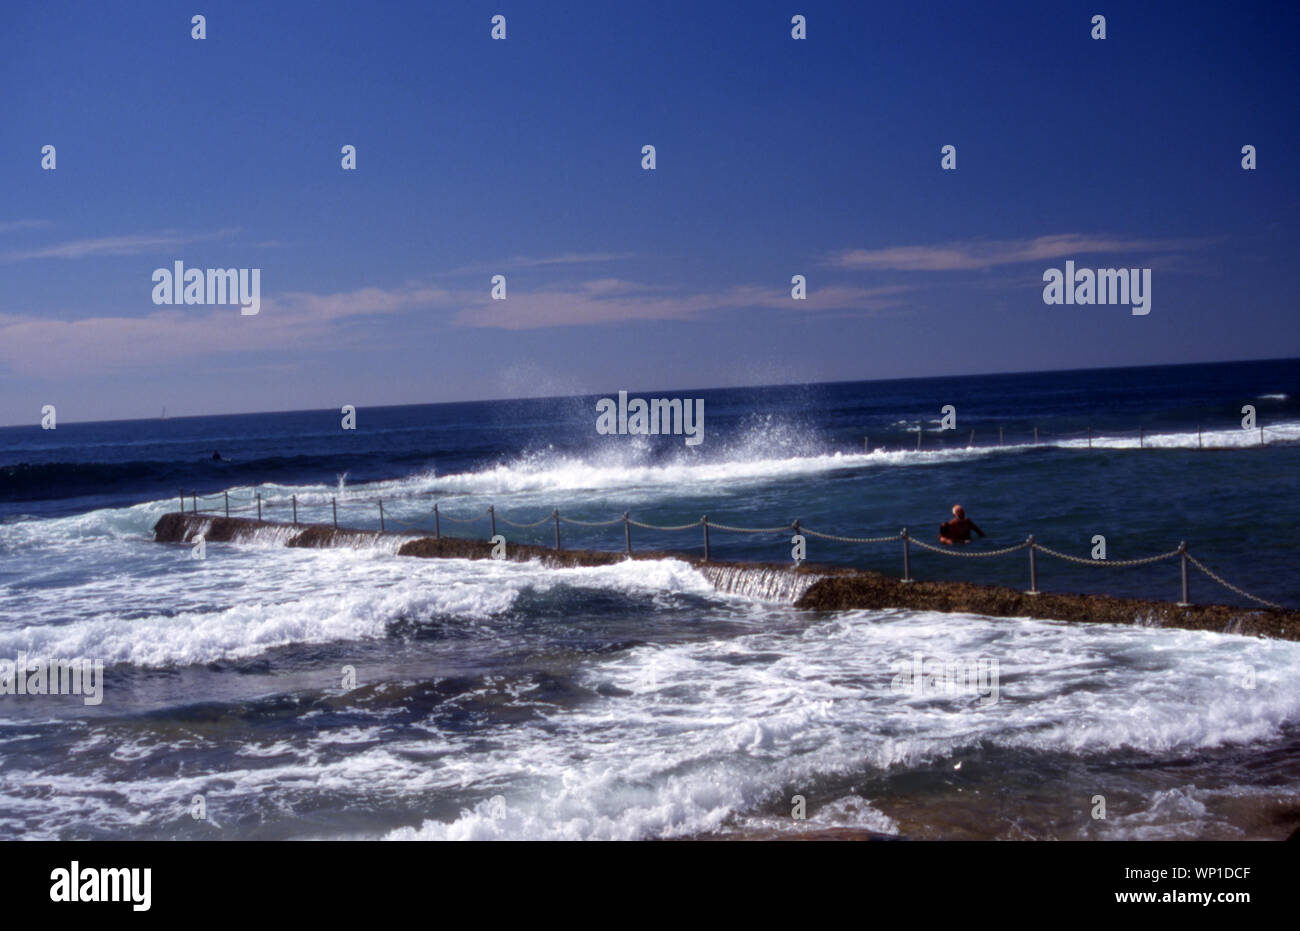 SWIMMERS IN THE OCEAN POOL AT MAROUBRA BEACH, SYDNEY, NEW SOUTH WALES, AUSTRALIA. Stock Photo